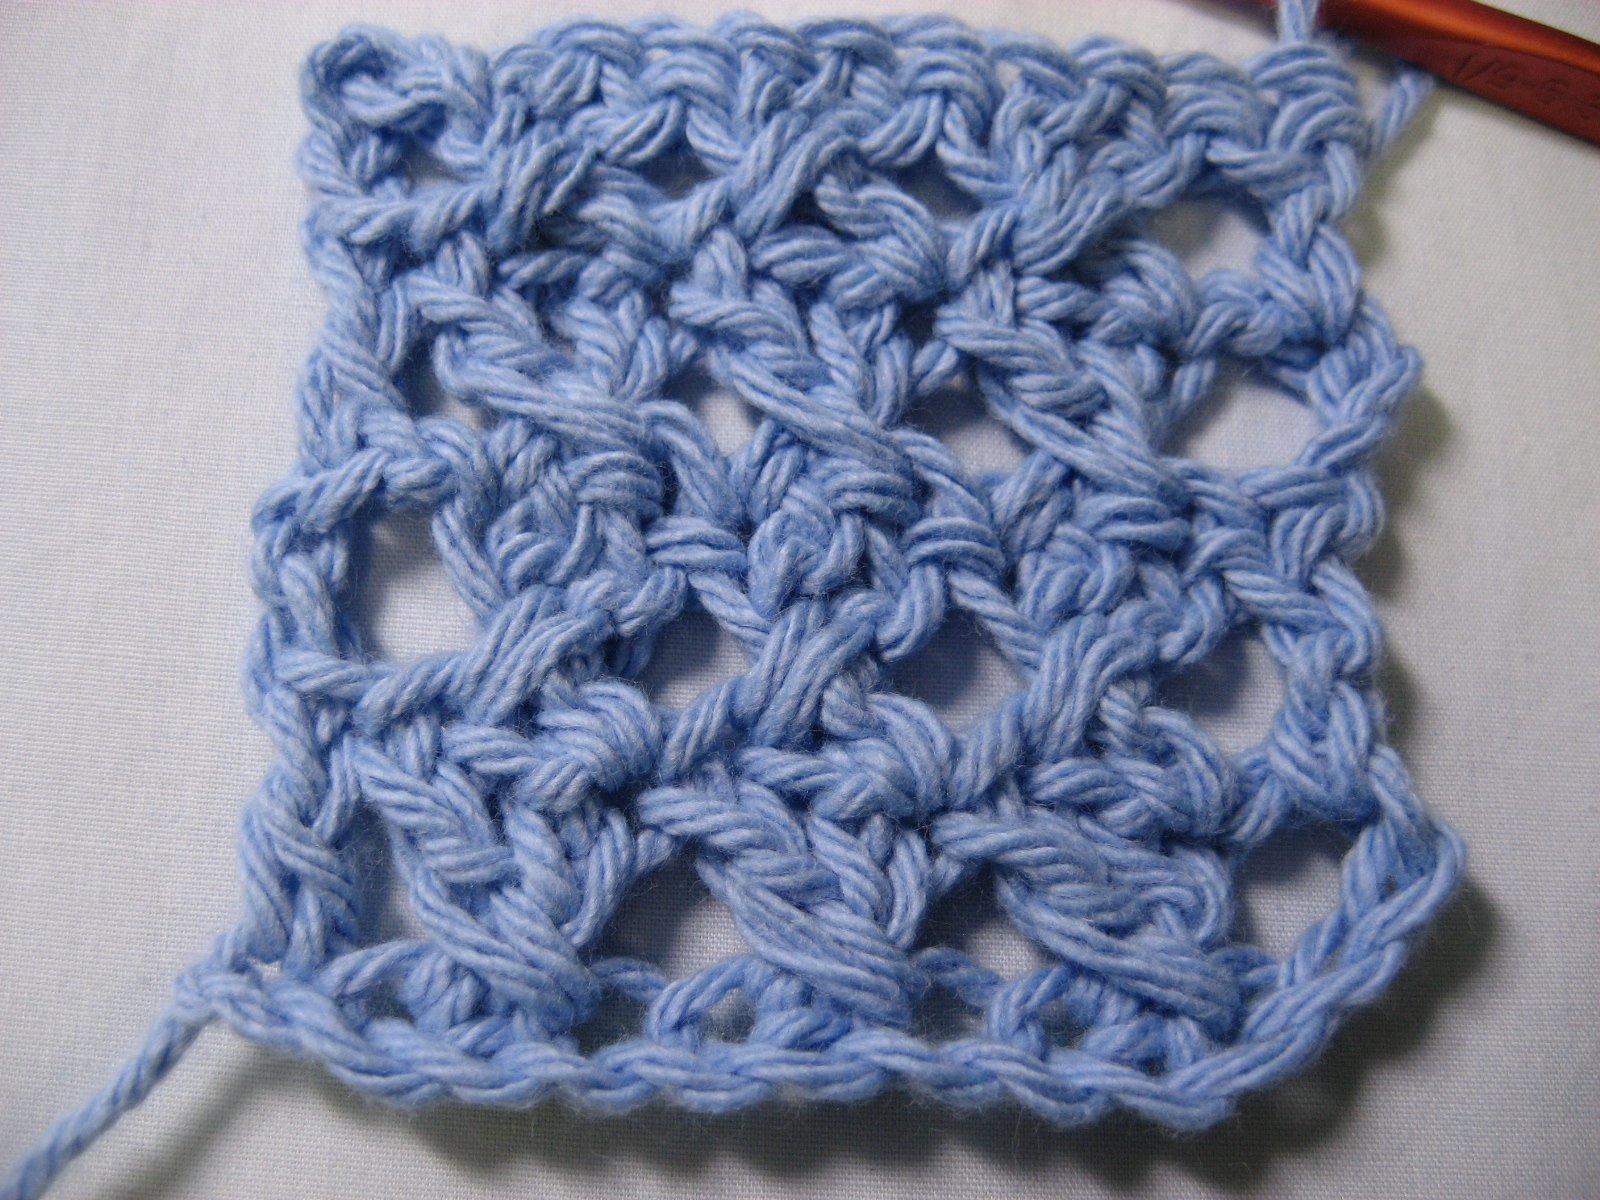 Hooked on Needles: Crossed Double Crochet - a video tutorial